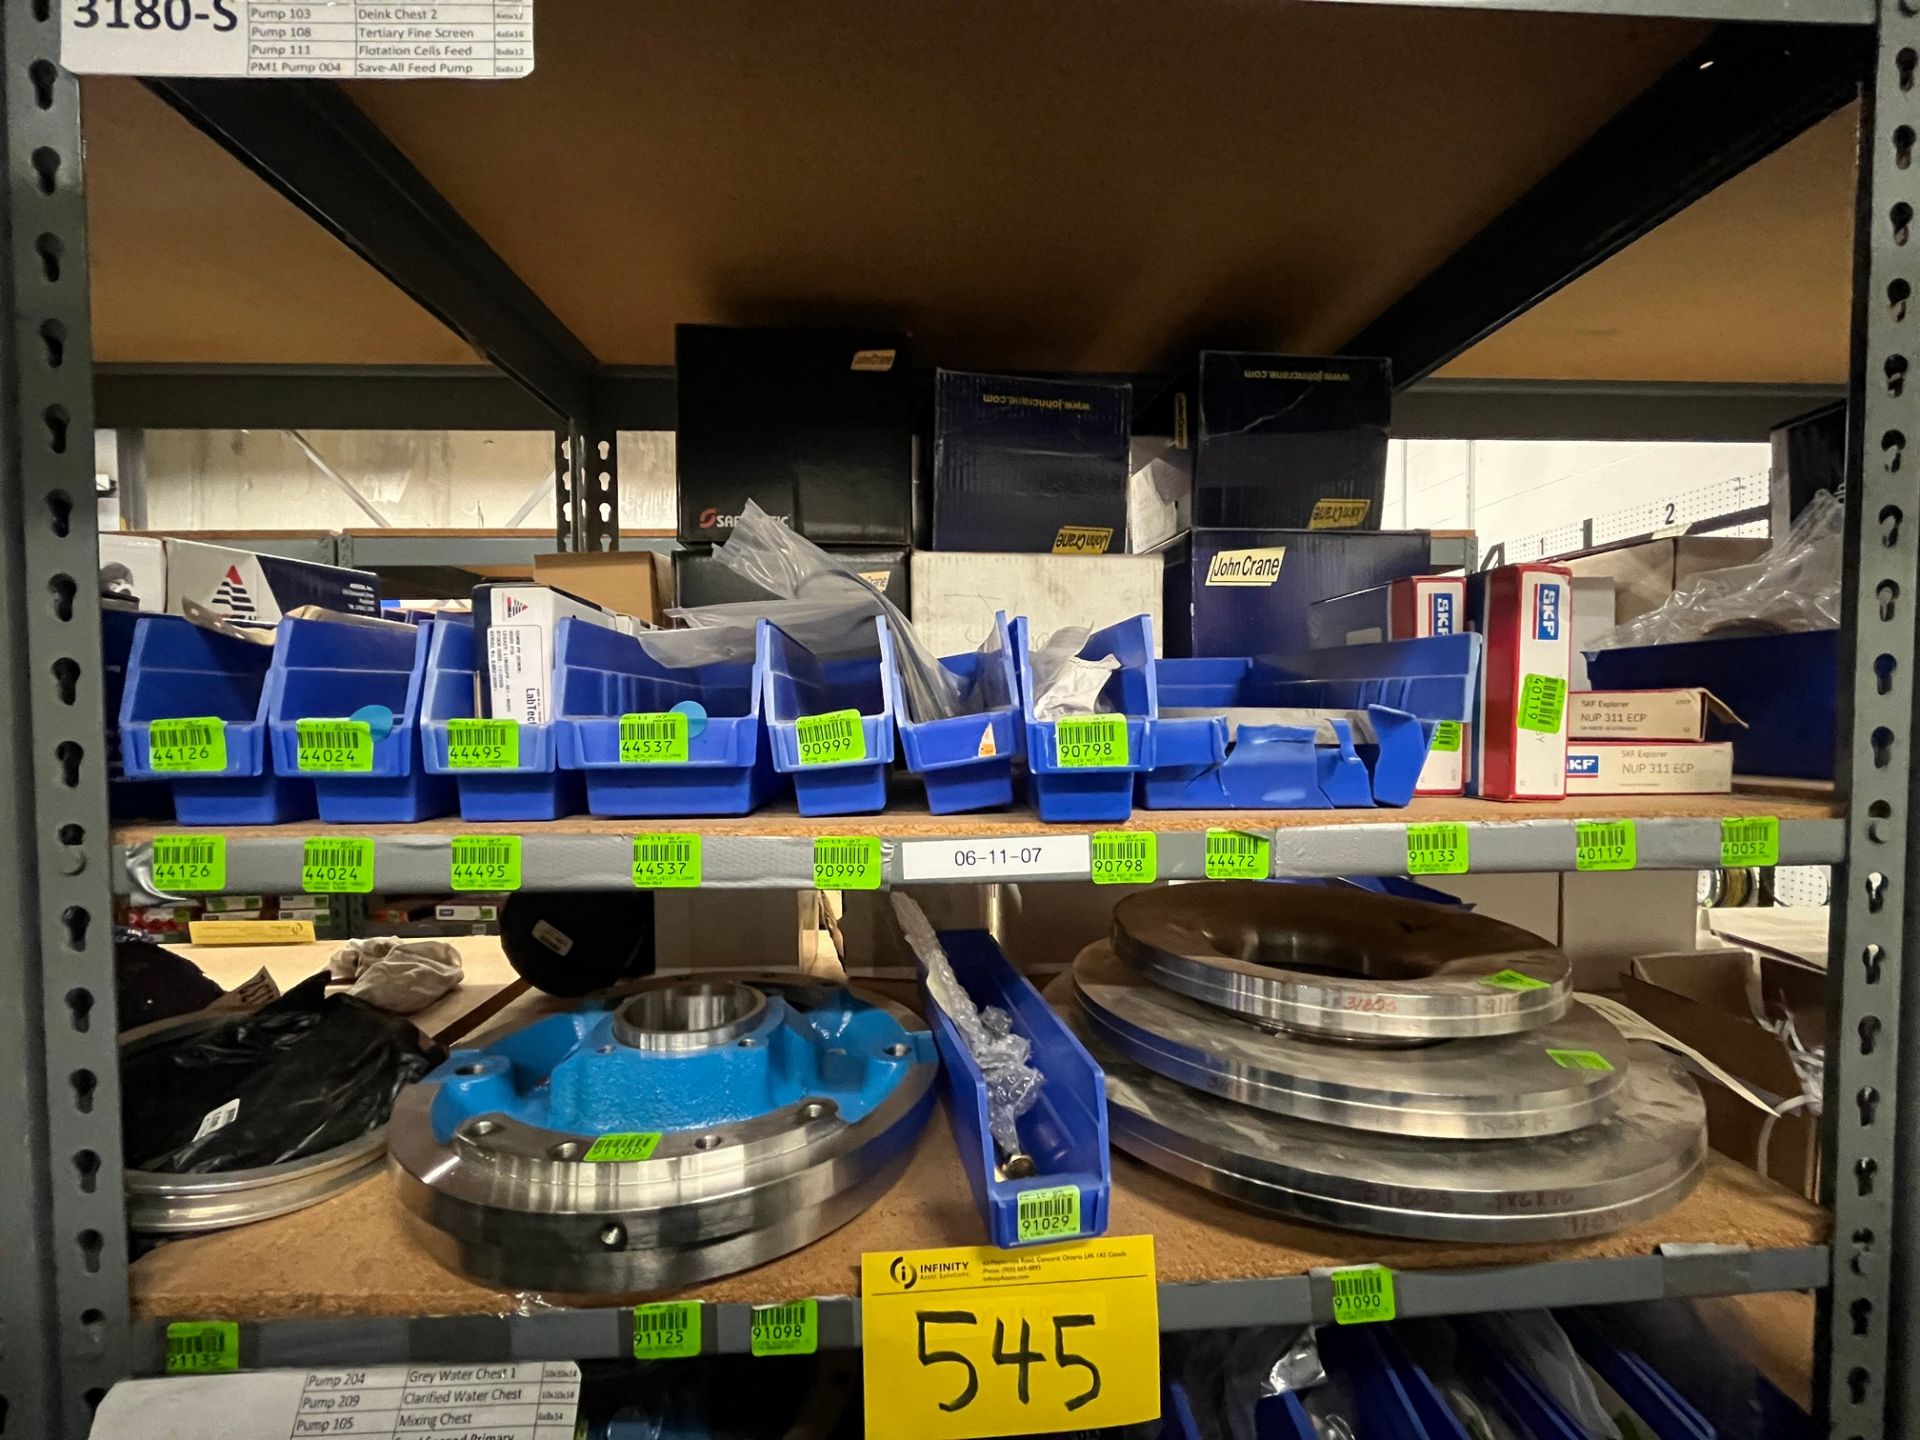 CONTENTS OF (3) SECTIONS OF 2-SIDED RACKING INCLUDING LOCK-NUTS, SEAL ASSEMBLIES, SHAFTS, PUMPS, - Image 19 of 26